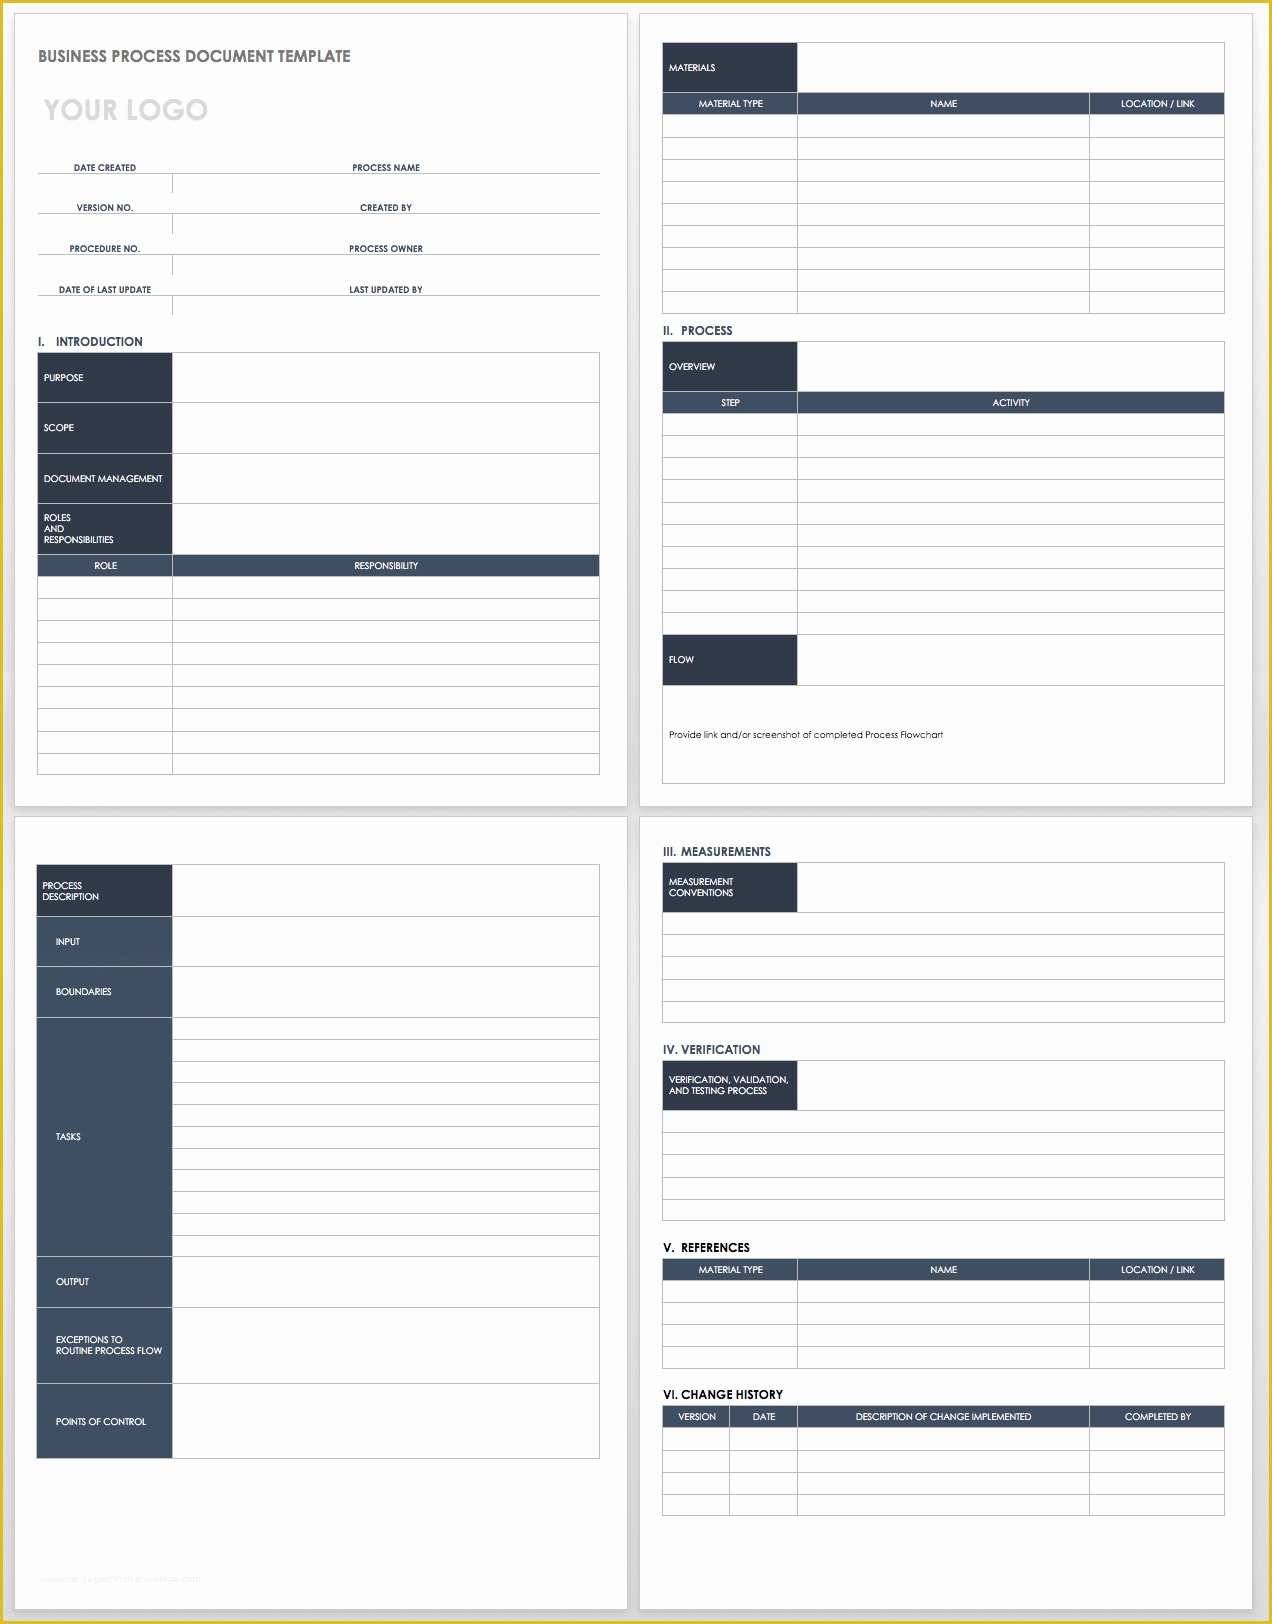 Free Business Process Mapping Template Of Free Process Document Templates